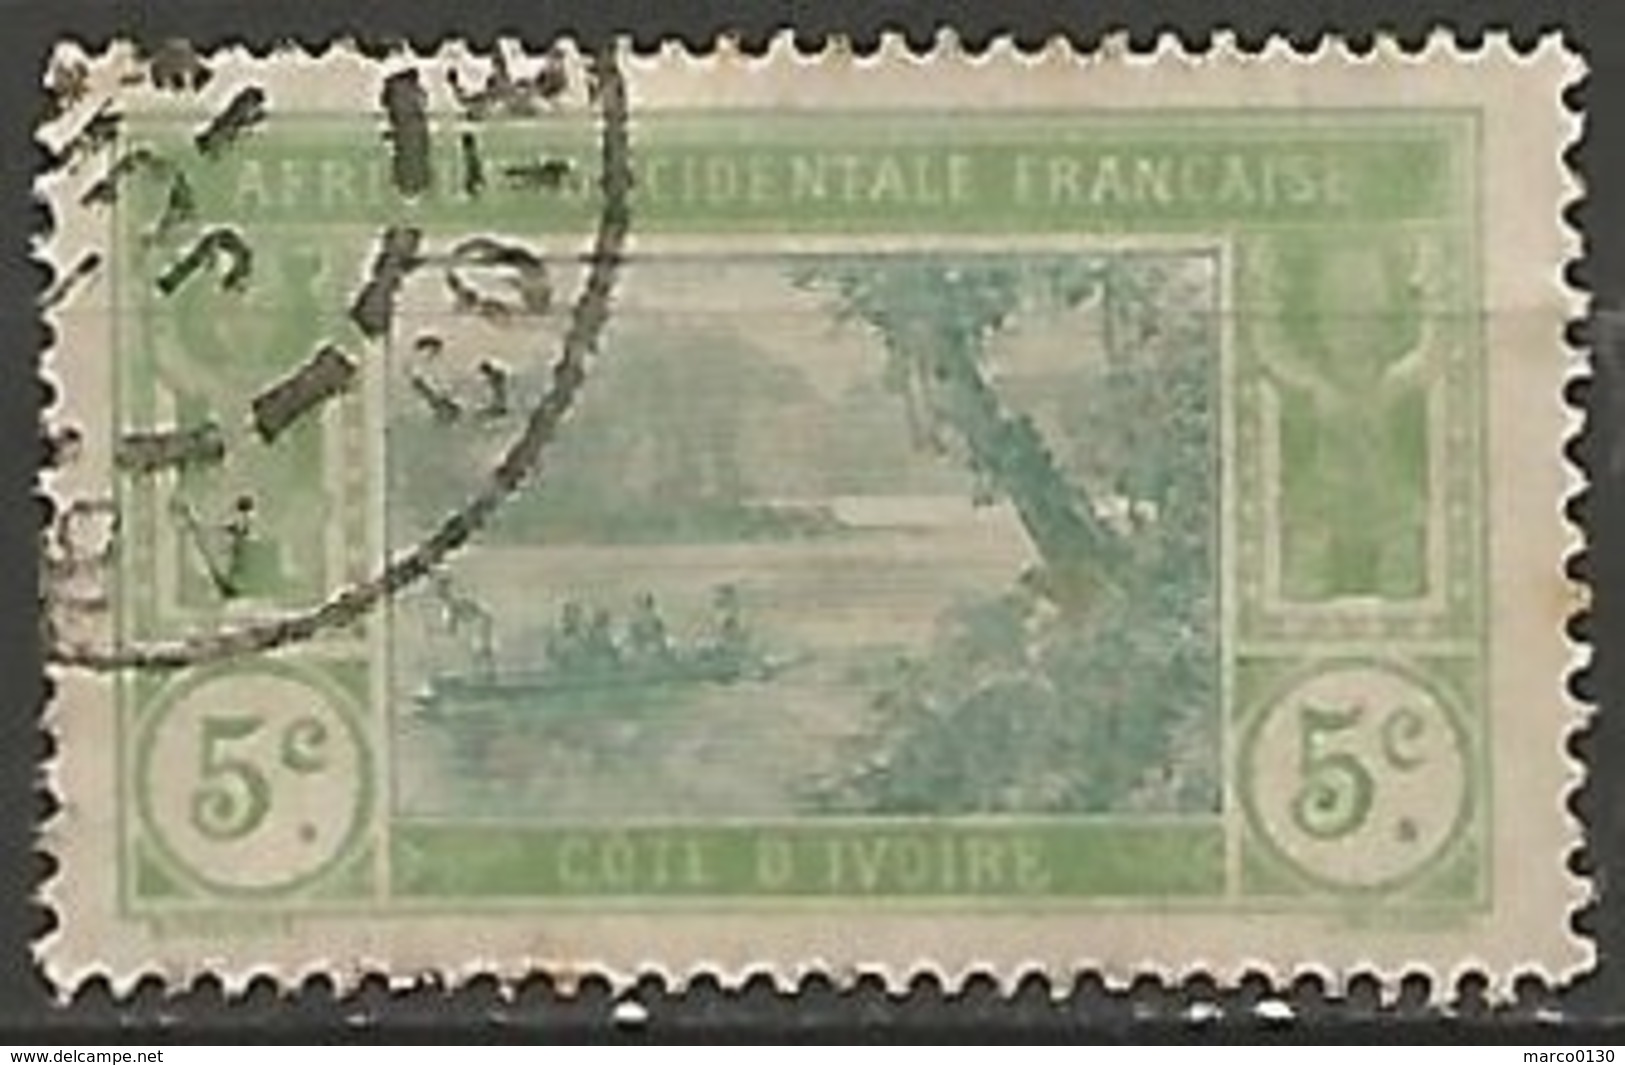 COTE D'IVOIRE N° 44 OBLITERE - Used Stamps